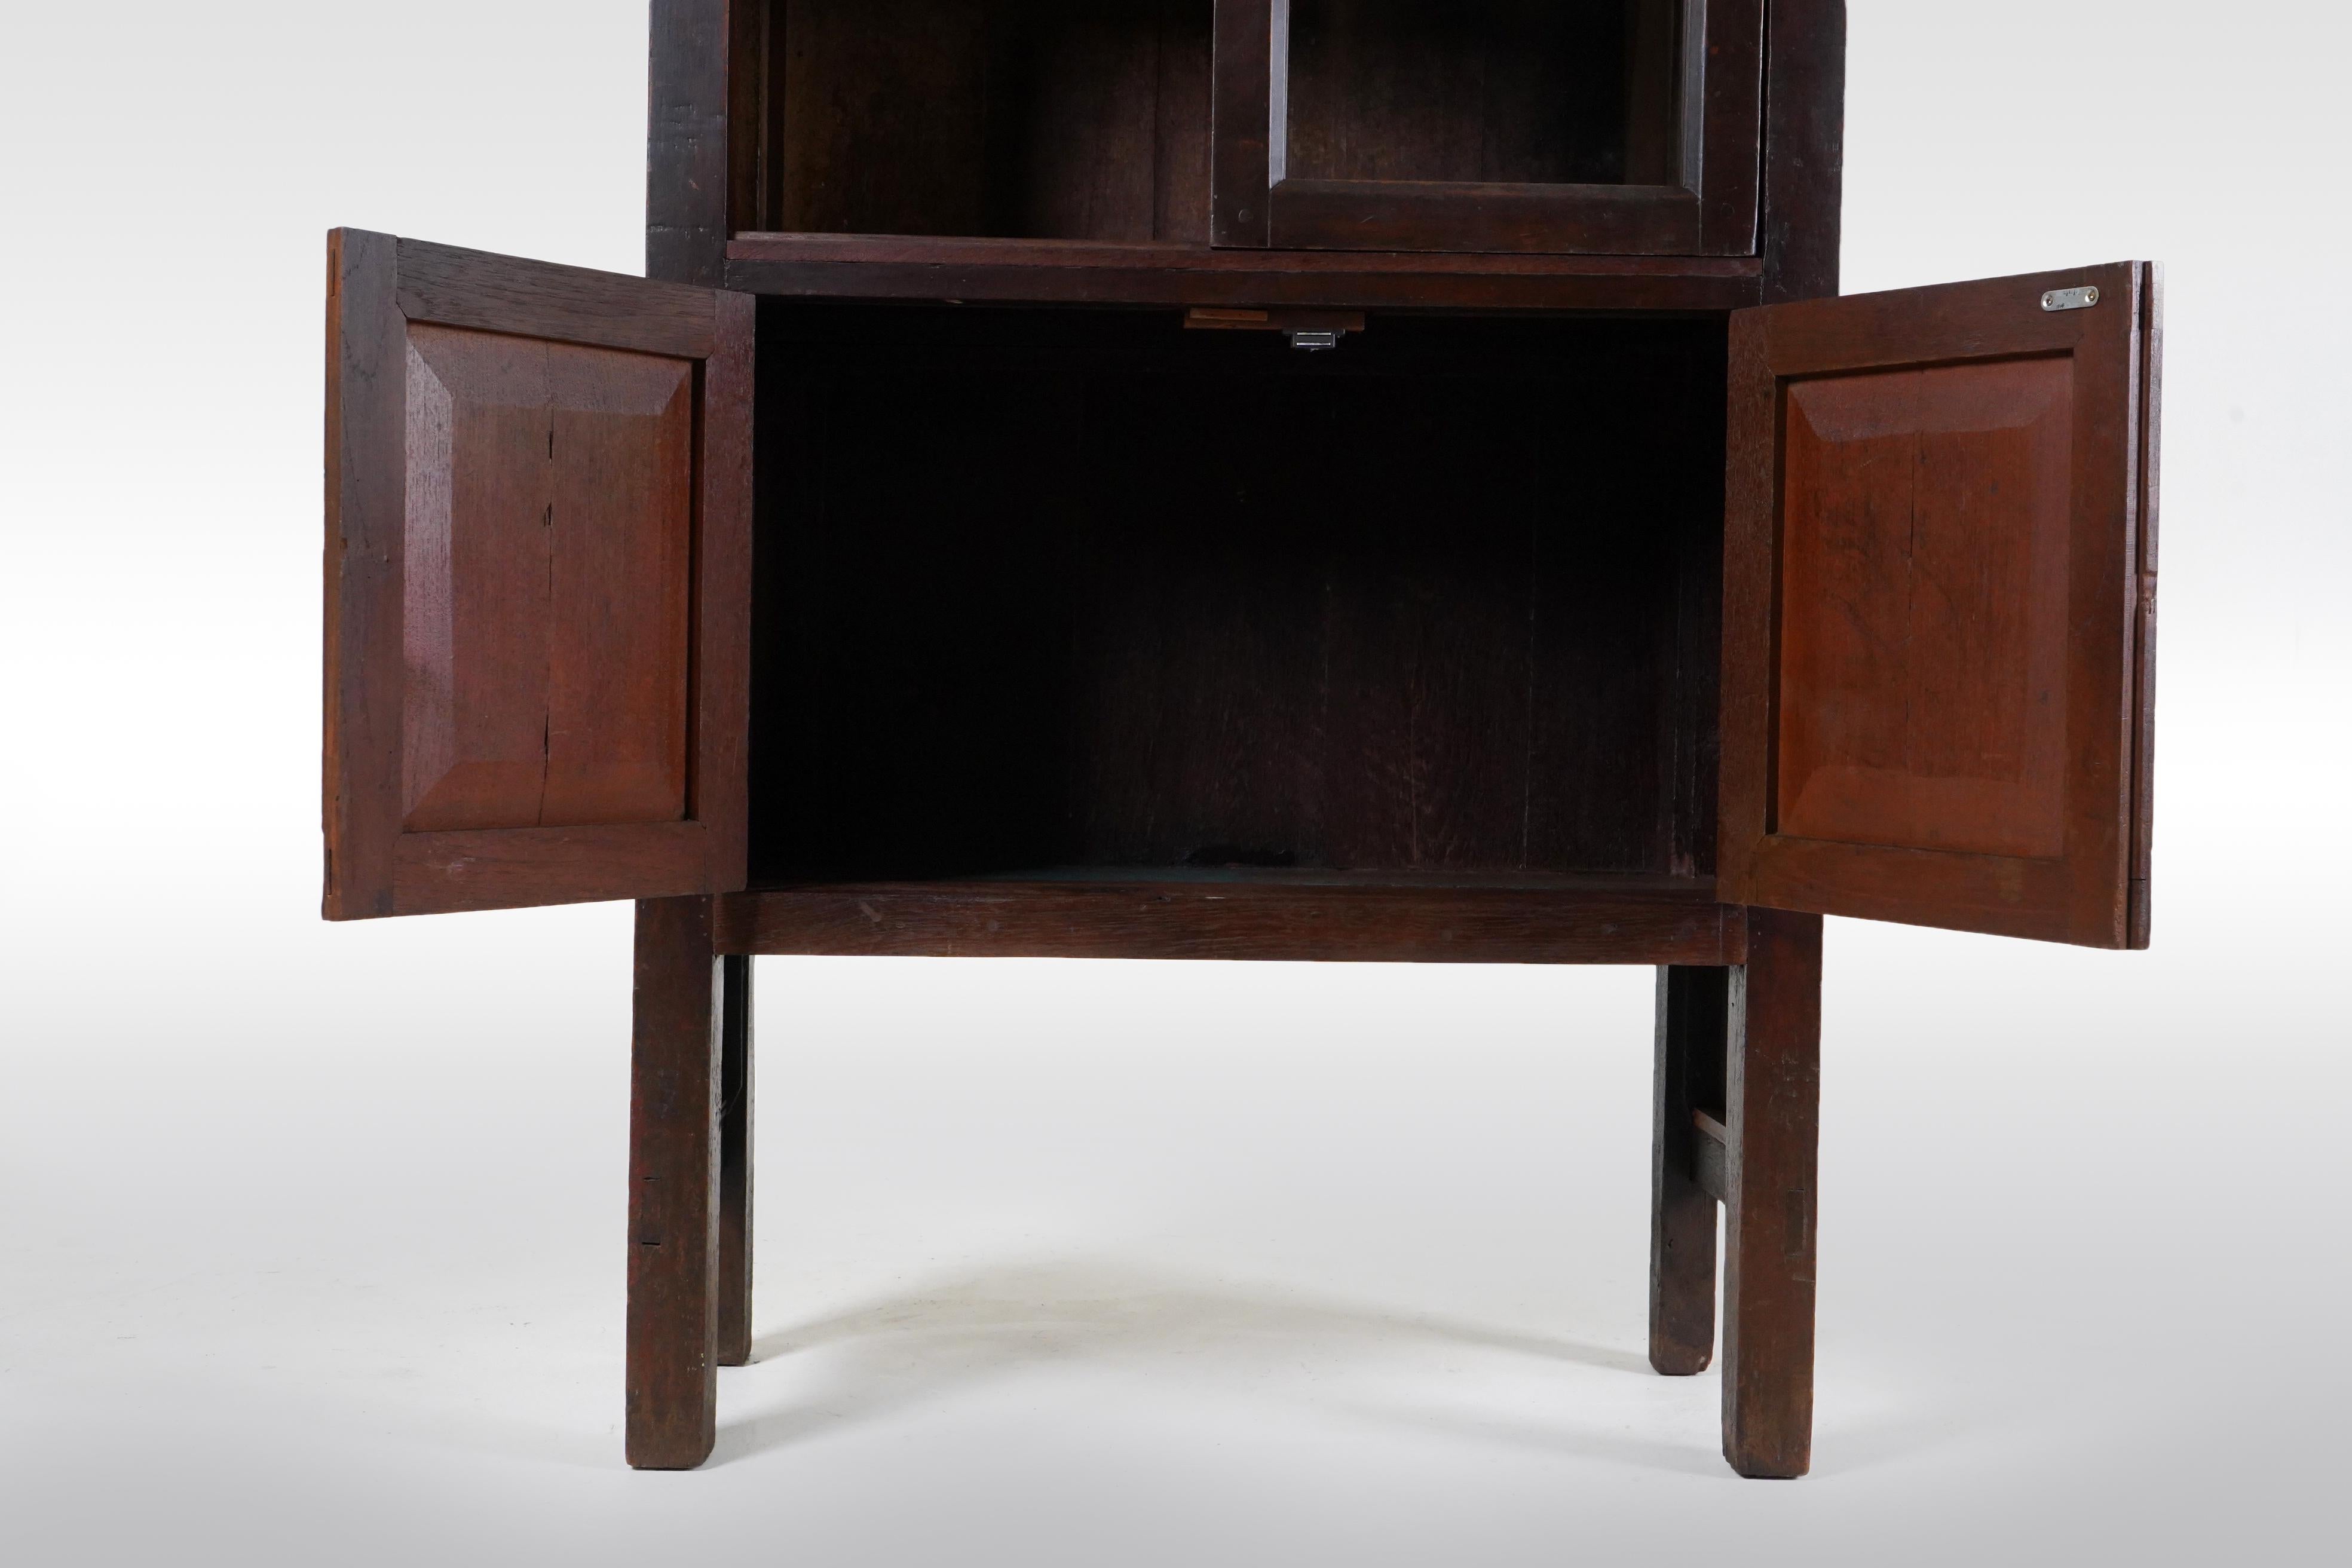 A British Colonial Teak Wood  Book Cabinet  4